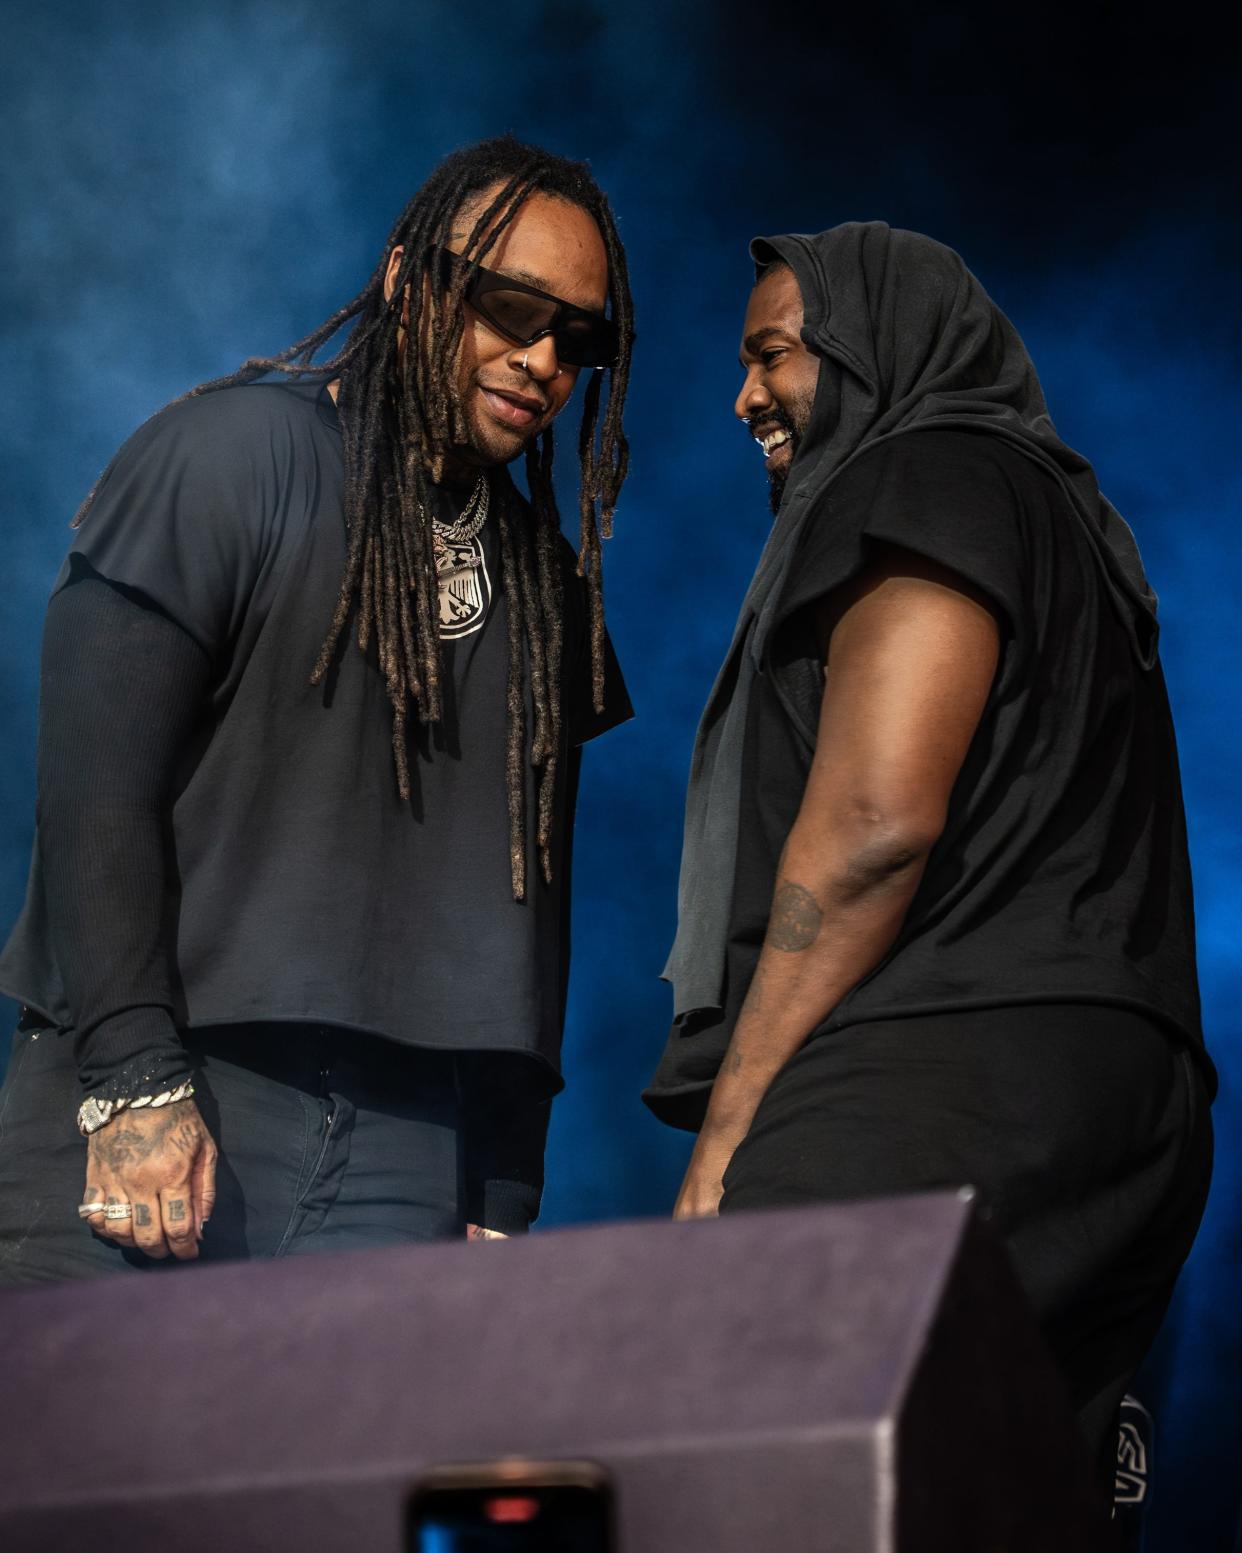 Ty Dolla $ign (left) and Ye — formerly Kanye West — make up the hip hop duo ¥$. They are pictured here ahead of the release of their debut album, "Vultures," in February 2024.